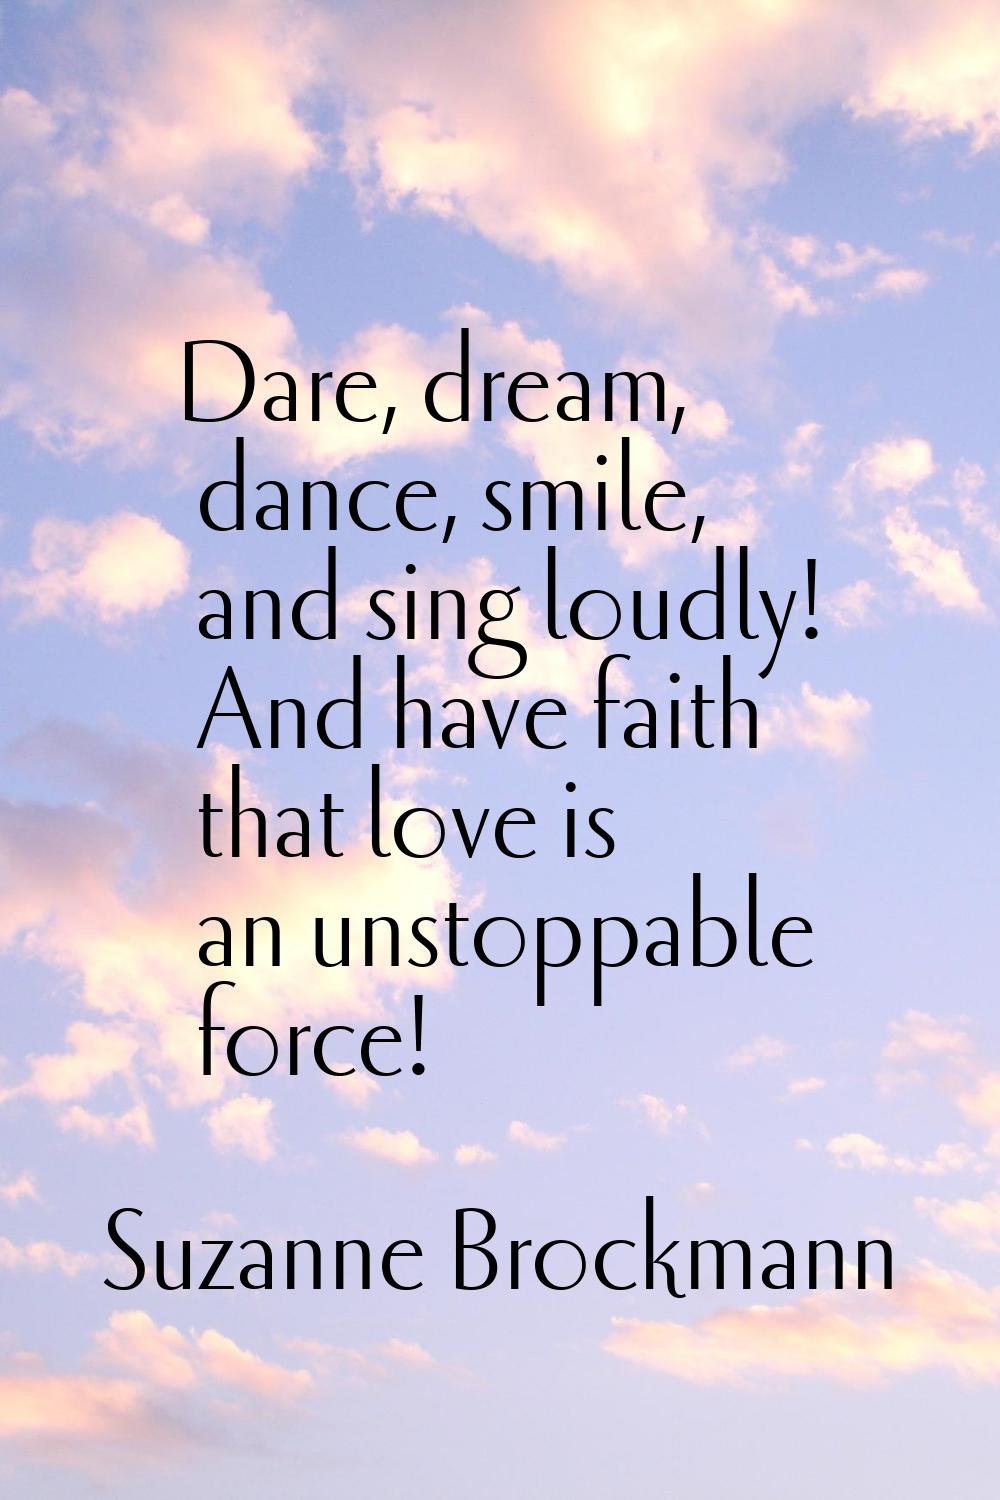 Dare, dream, dance, smile, and sing loudly! And have faith that love is an unstoppable force!